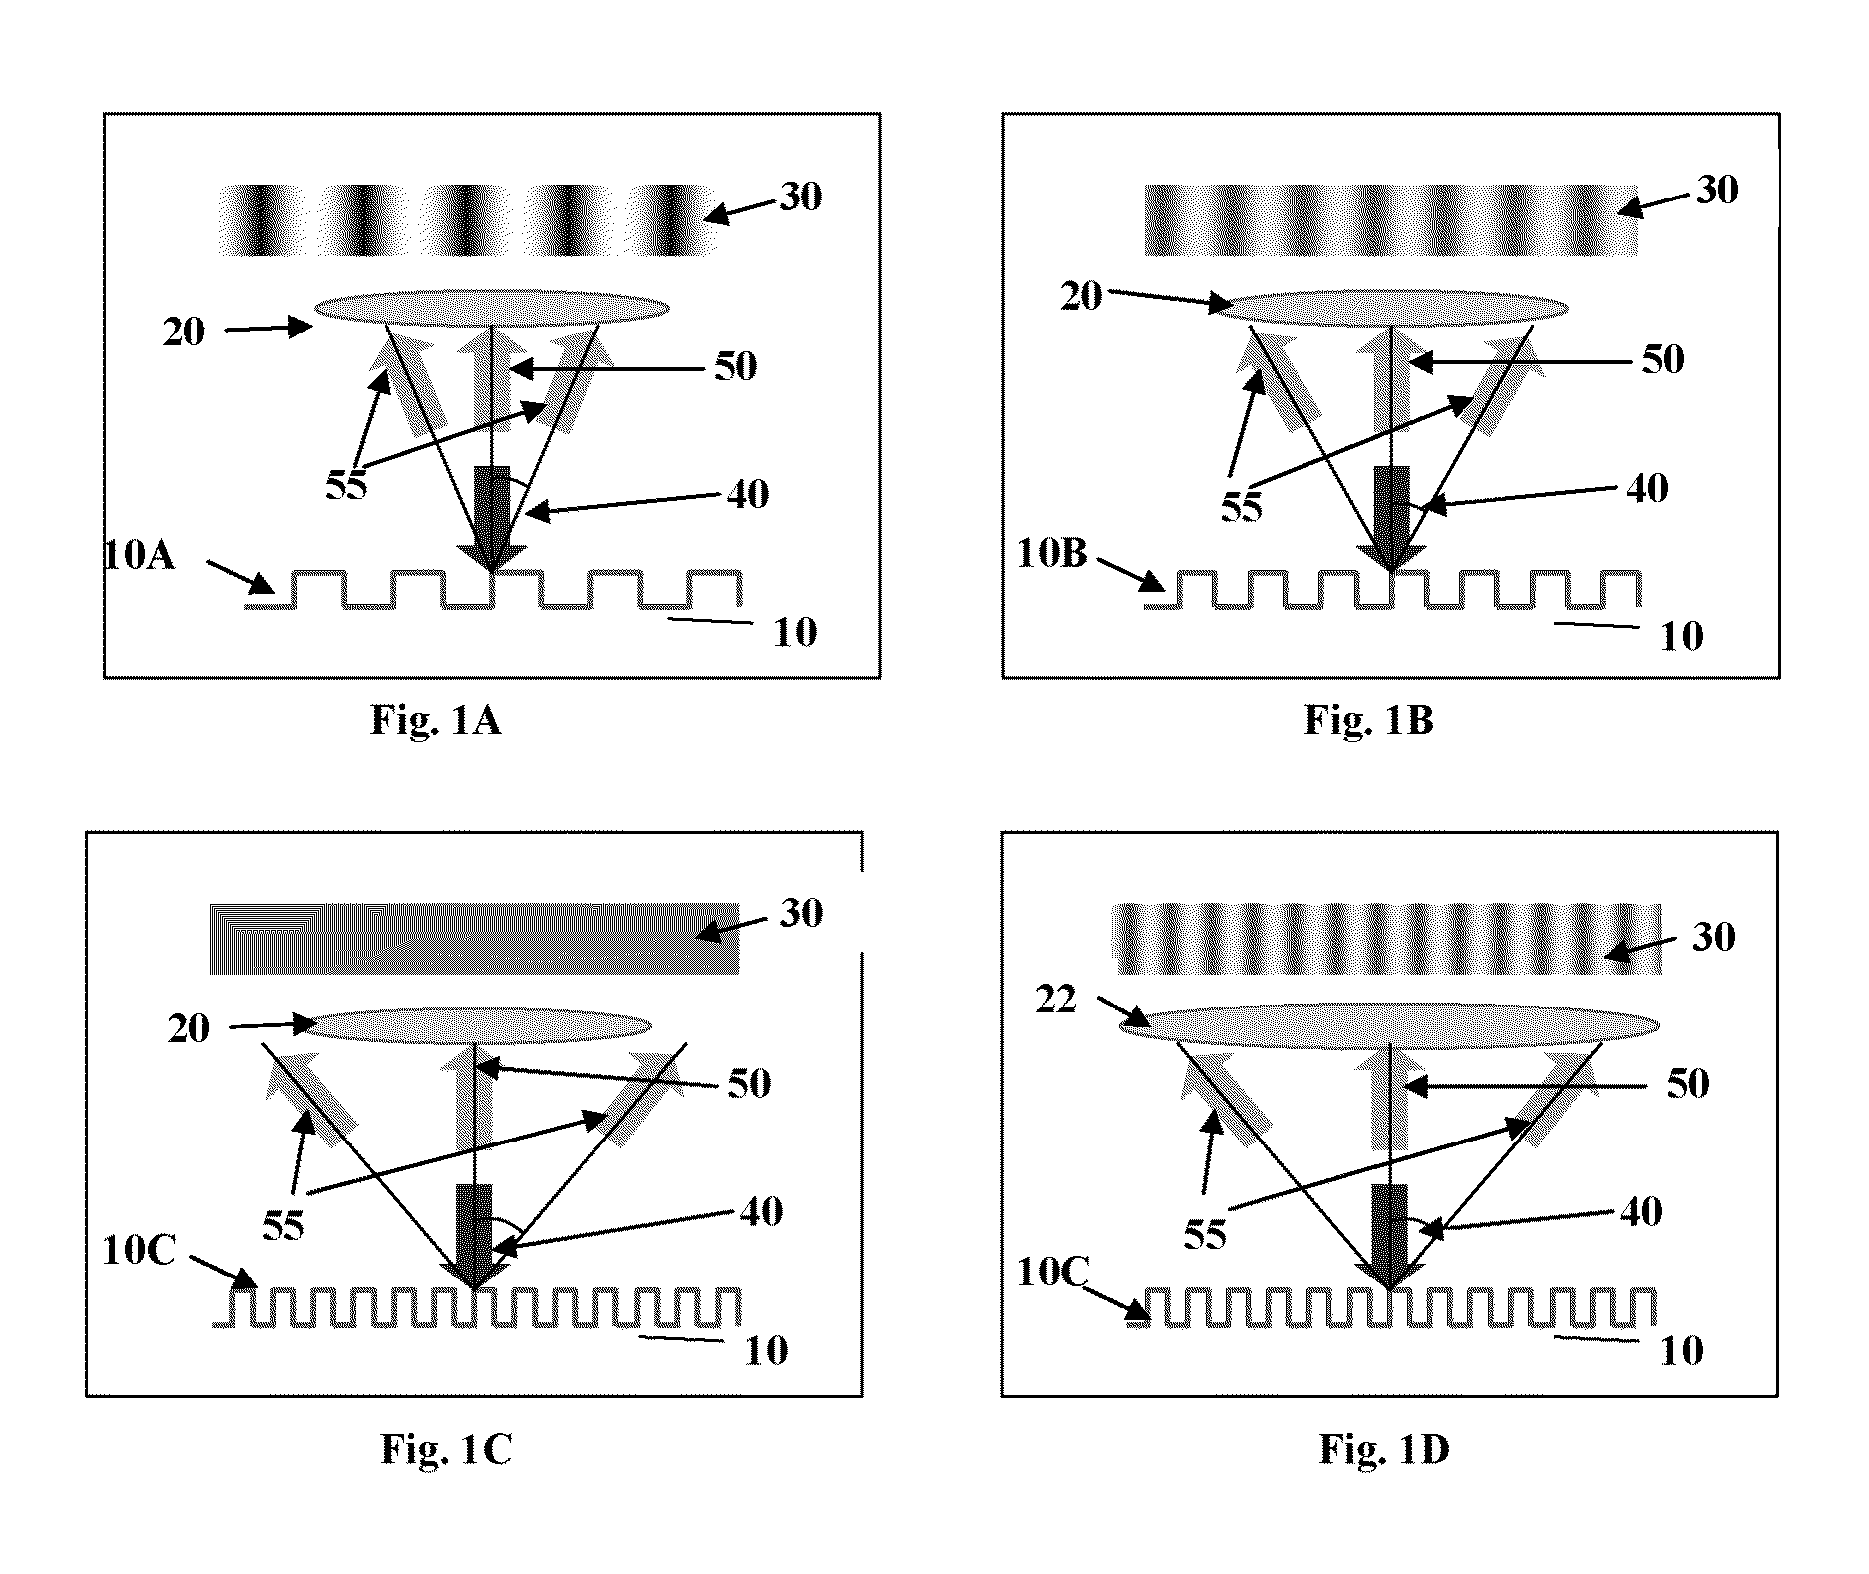 Optical system and method for inspection of patterned samples